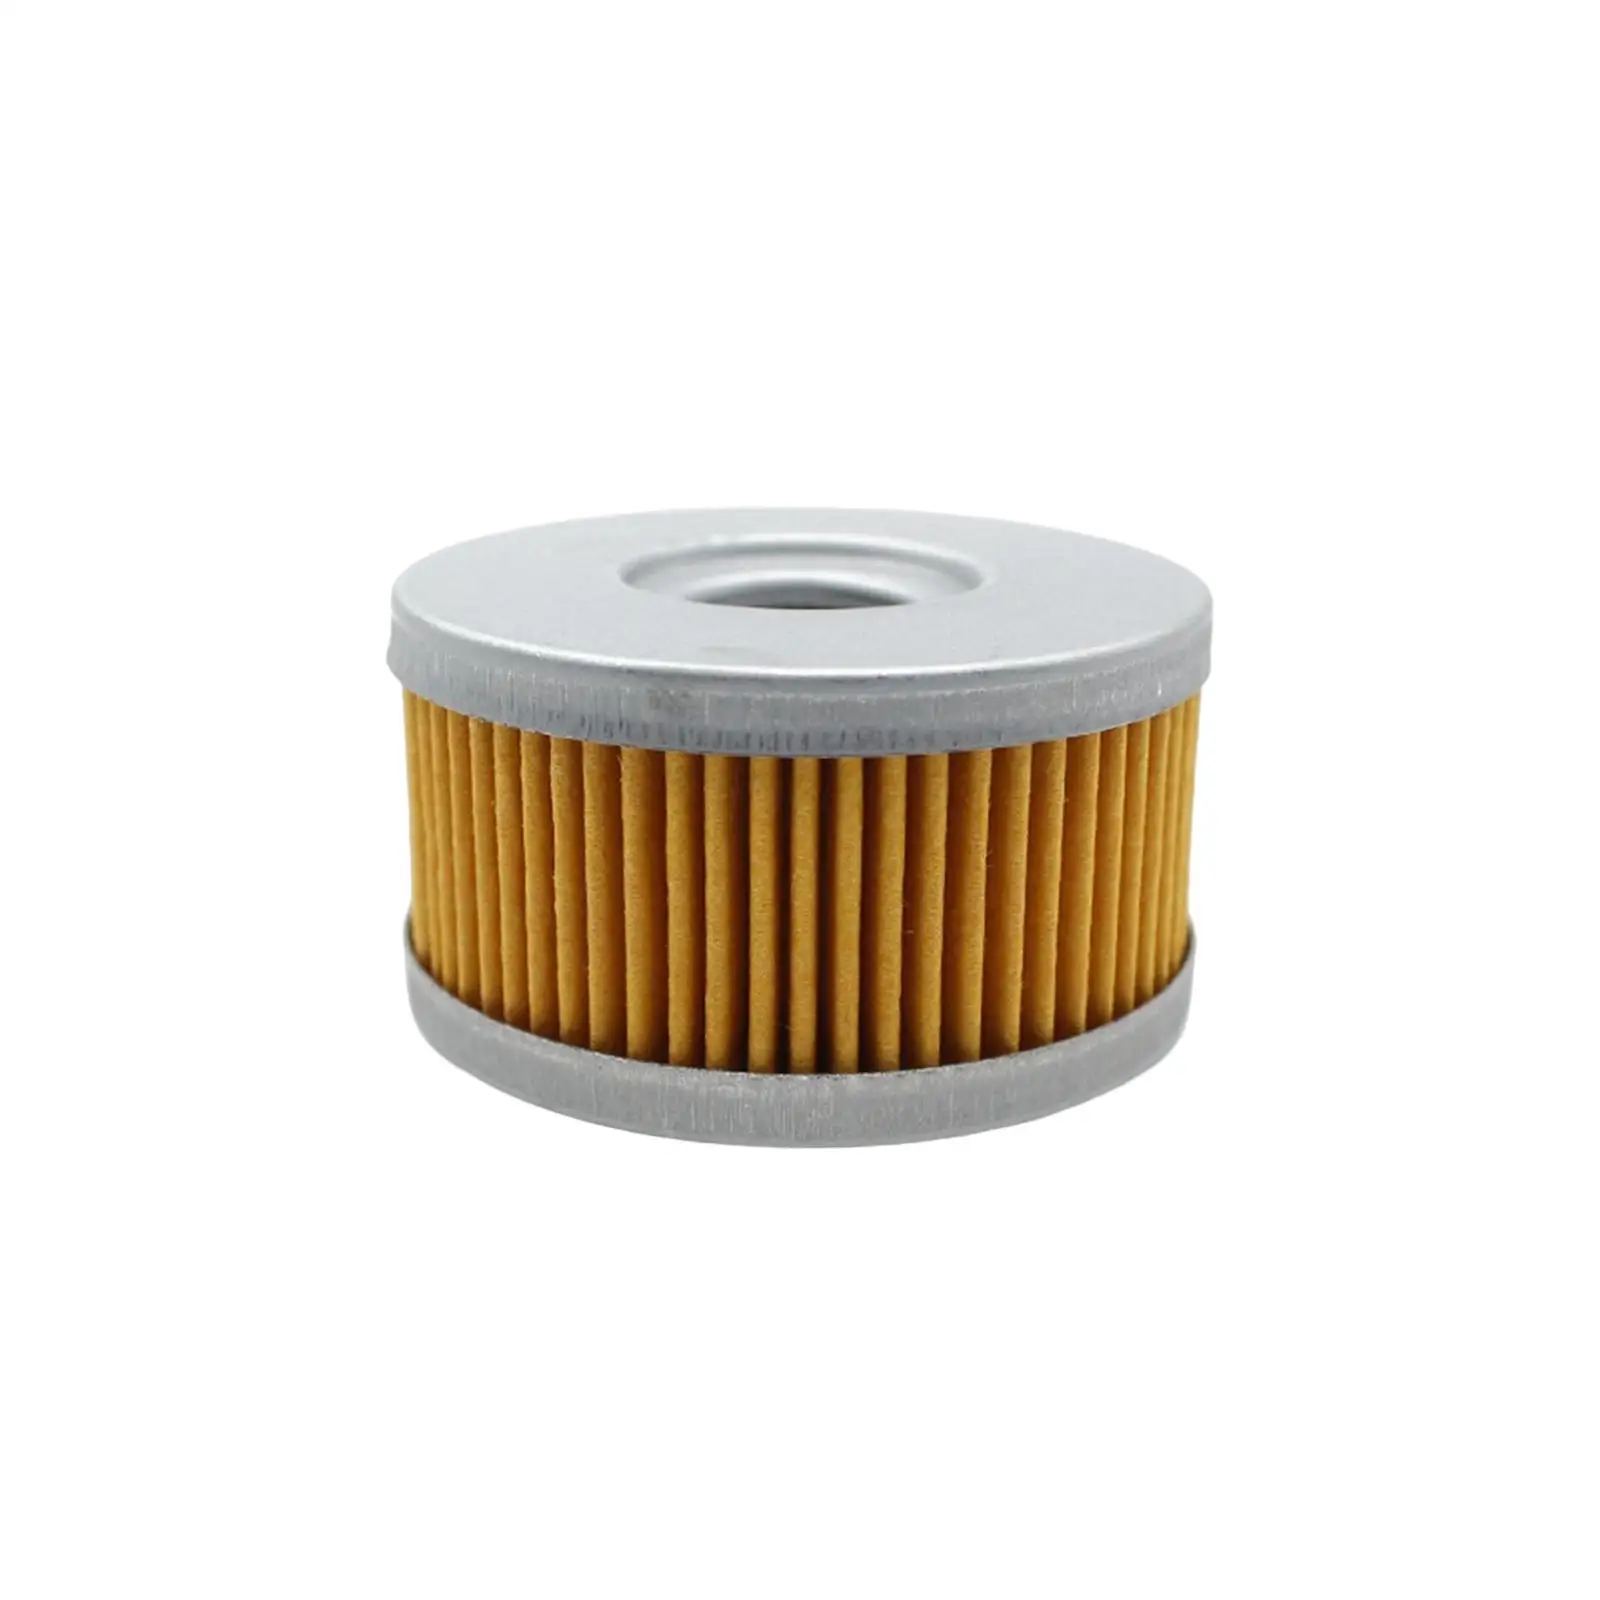 Engine Oil Filter High Performance Yellow forZ250 Gn250 DR350